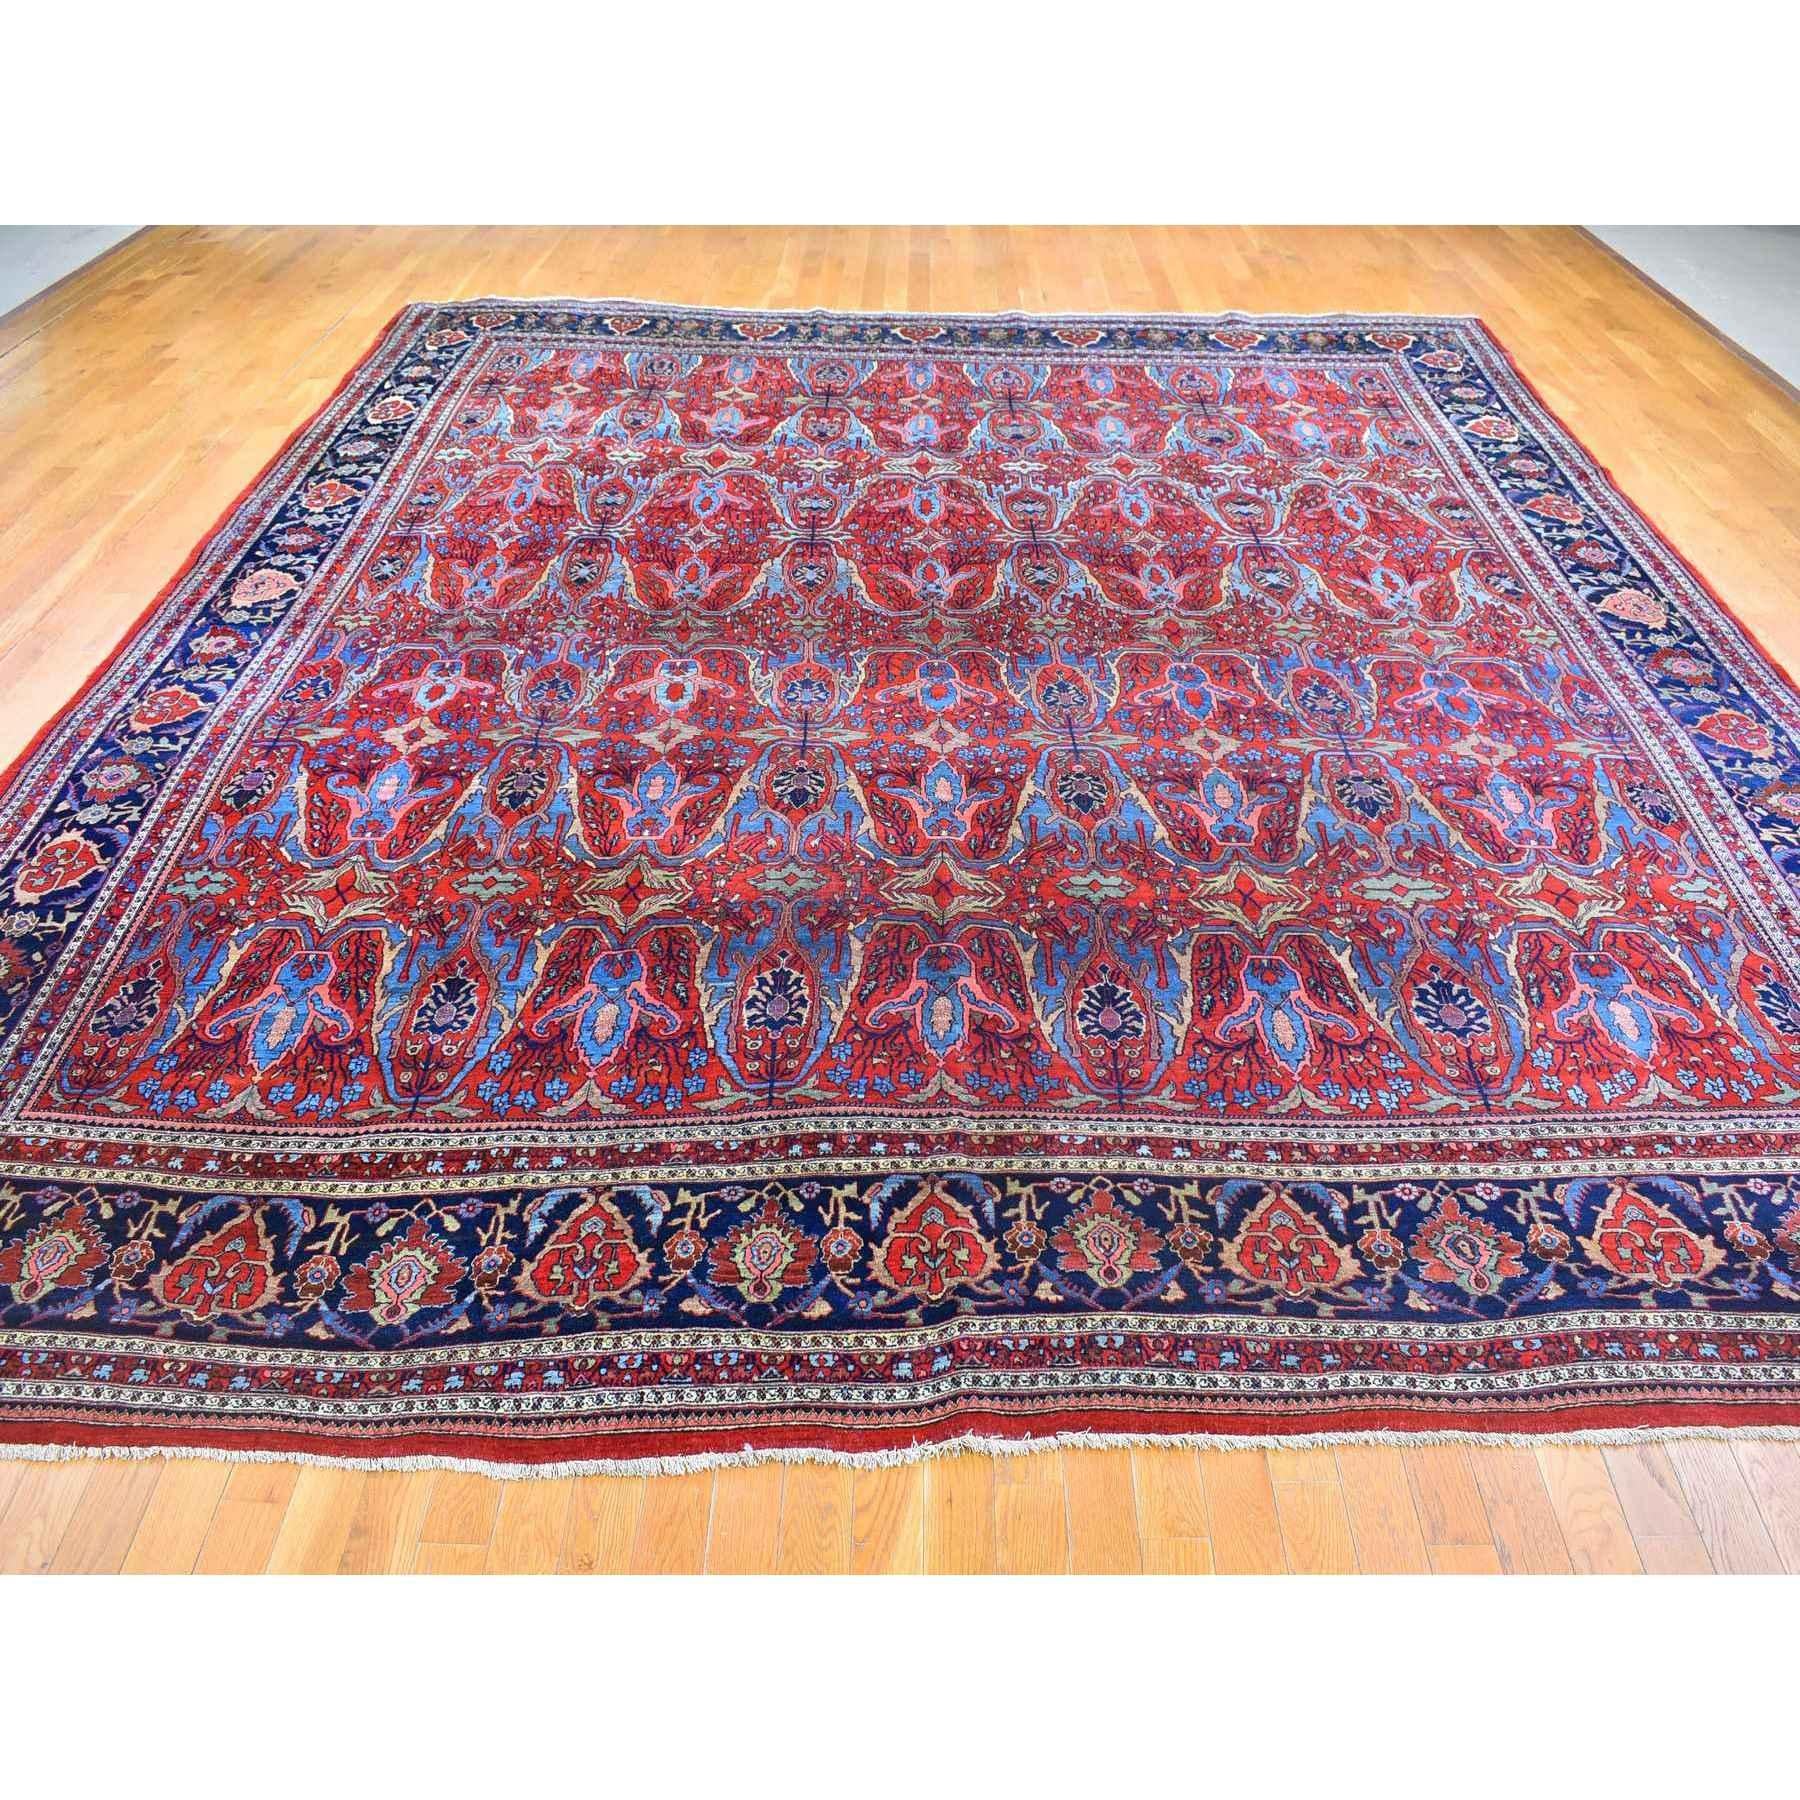 This fabulous hand-knotted carpet has been created and designed for extra strength and durability. This rug has been handcrafted for weeks in the traditional method that is used to make
Exact Rug Size in Feet and Inches : 12'5